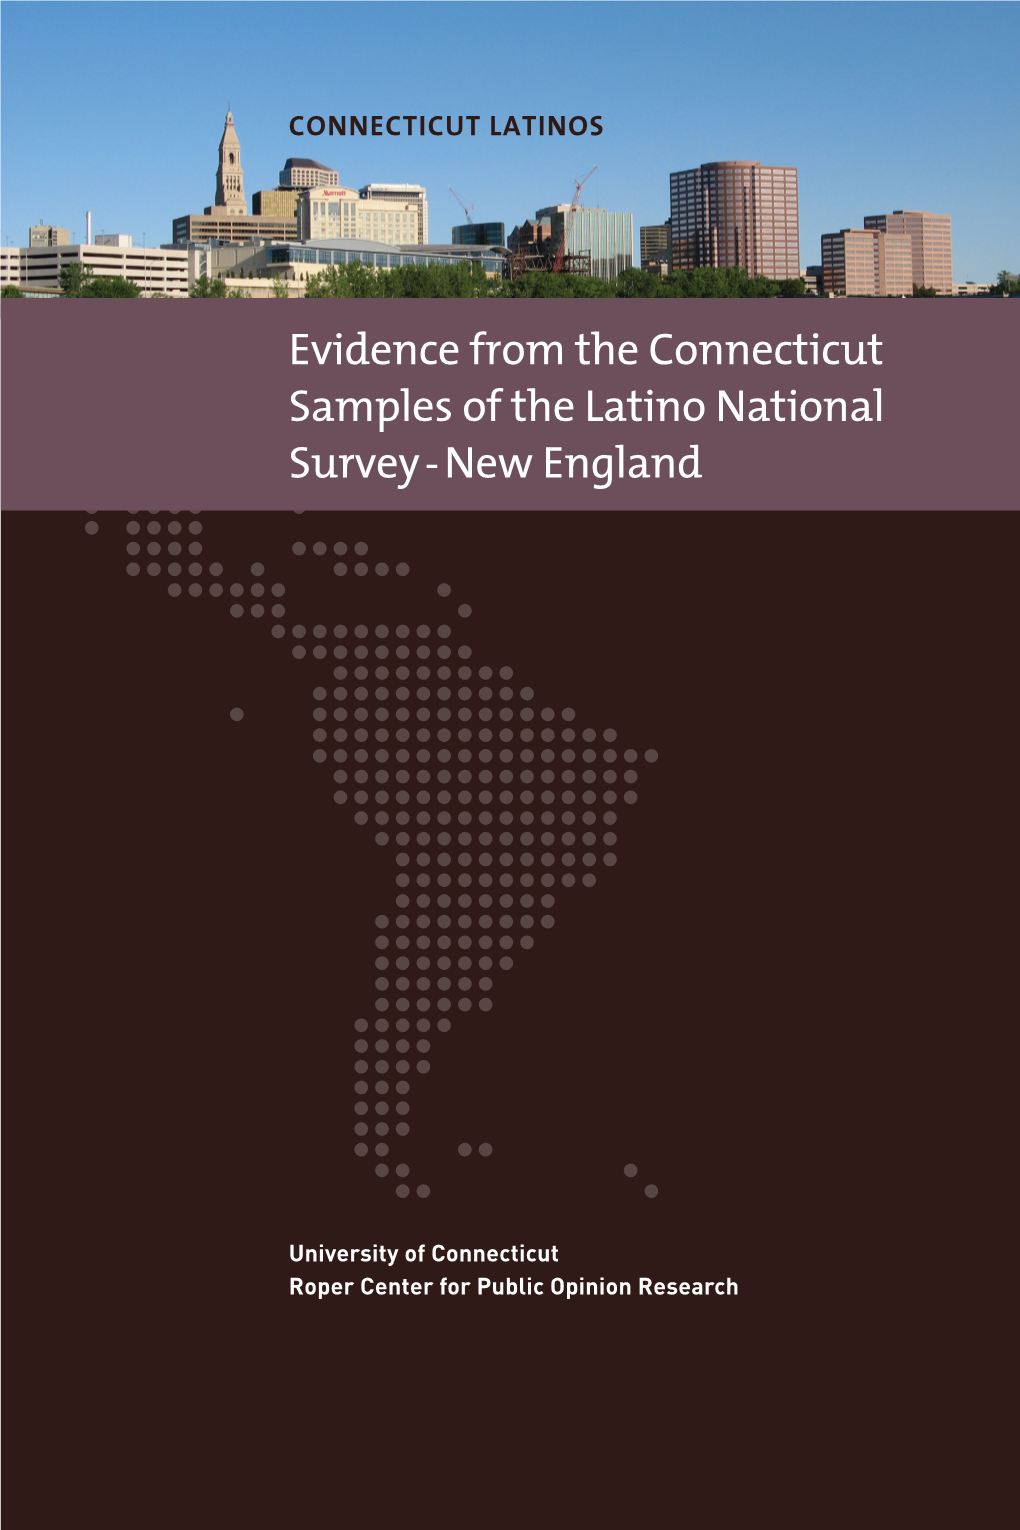 Evidence from the Connecticut Samples of the Latino National Survey - New England